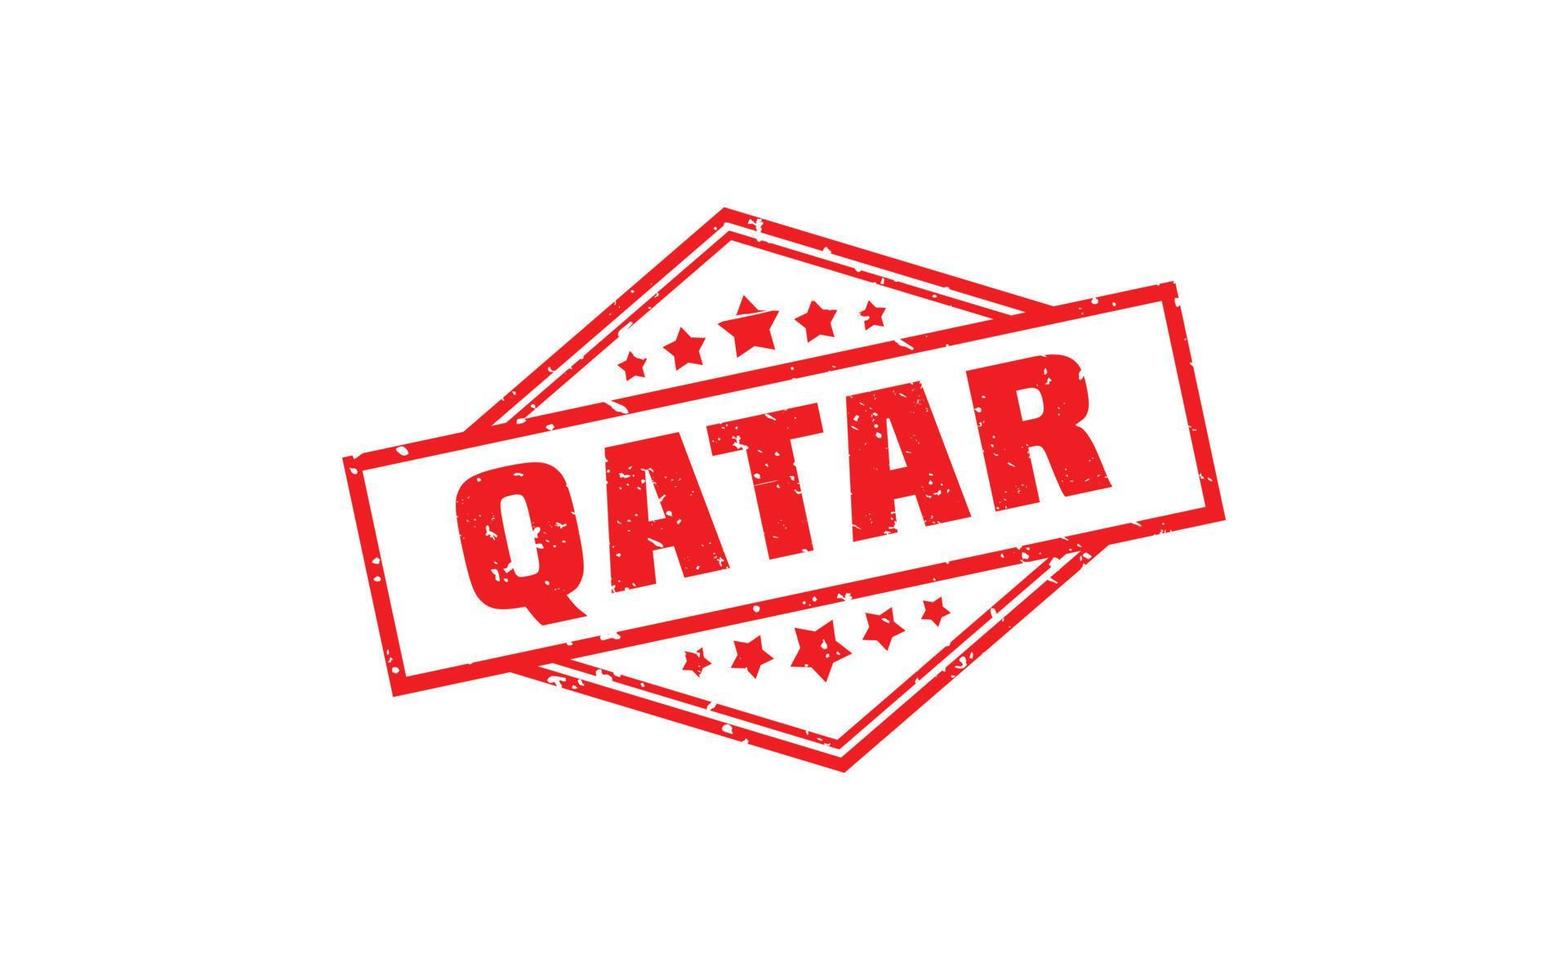 QATAR stamp rubber with grunge style on white background vector